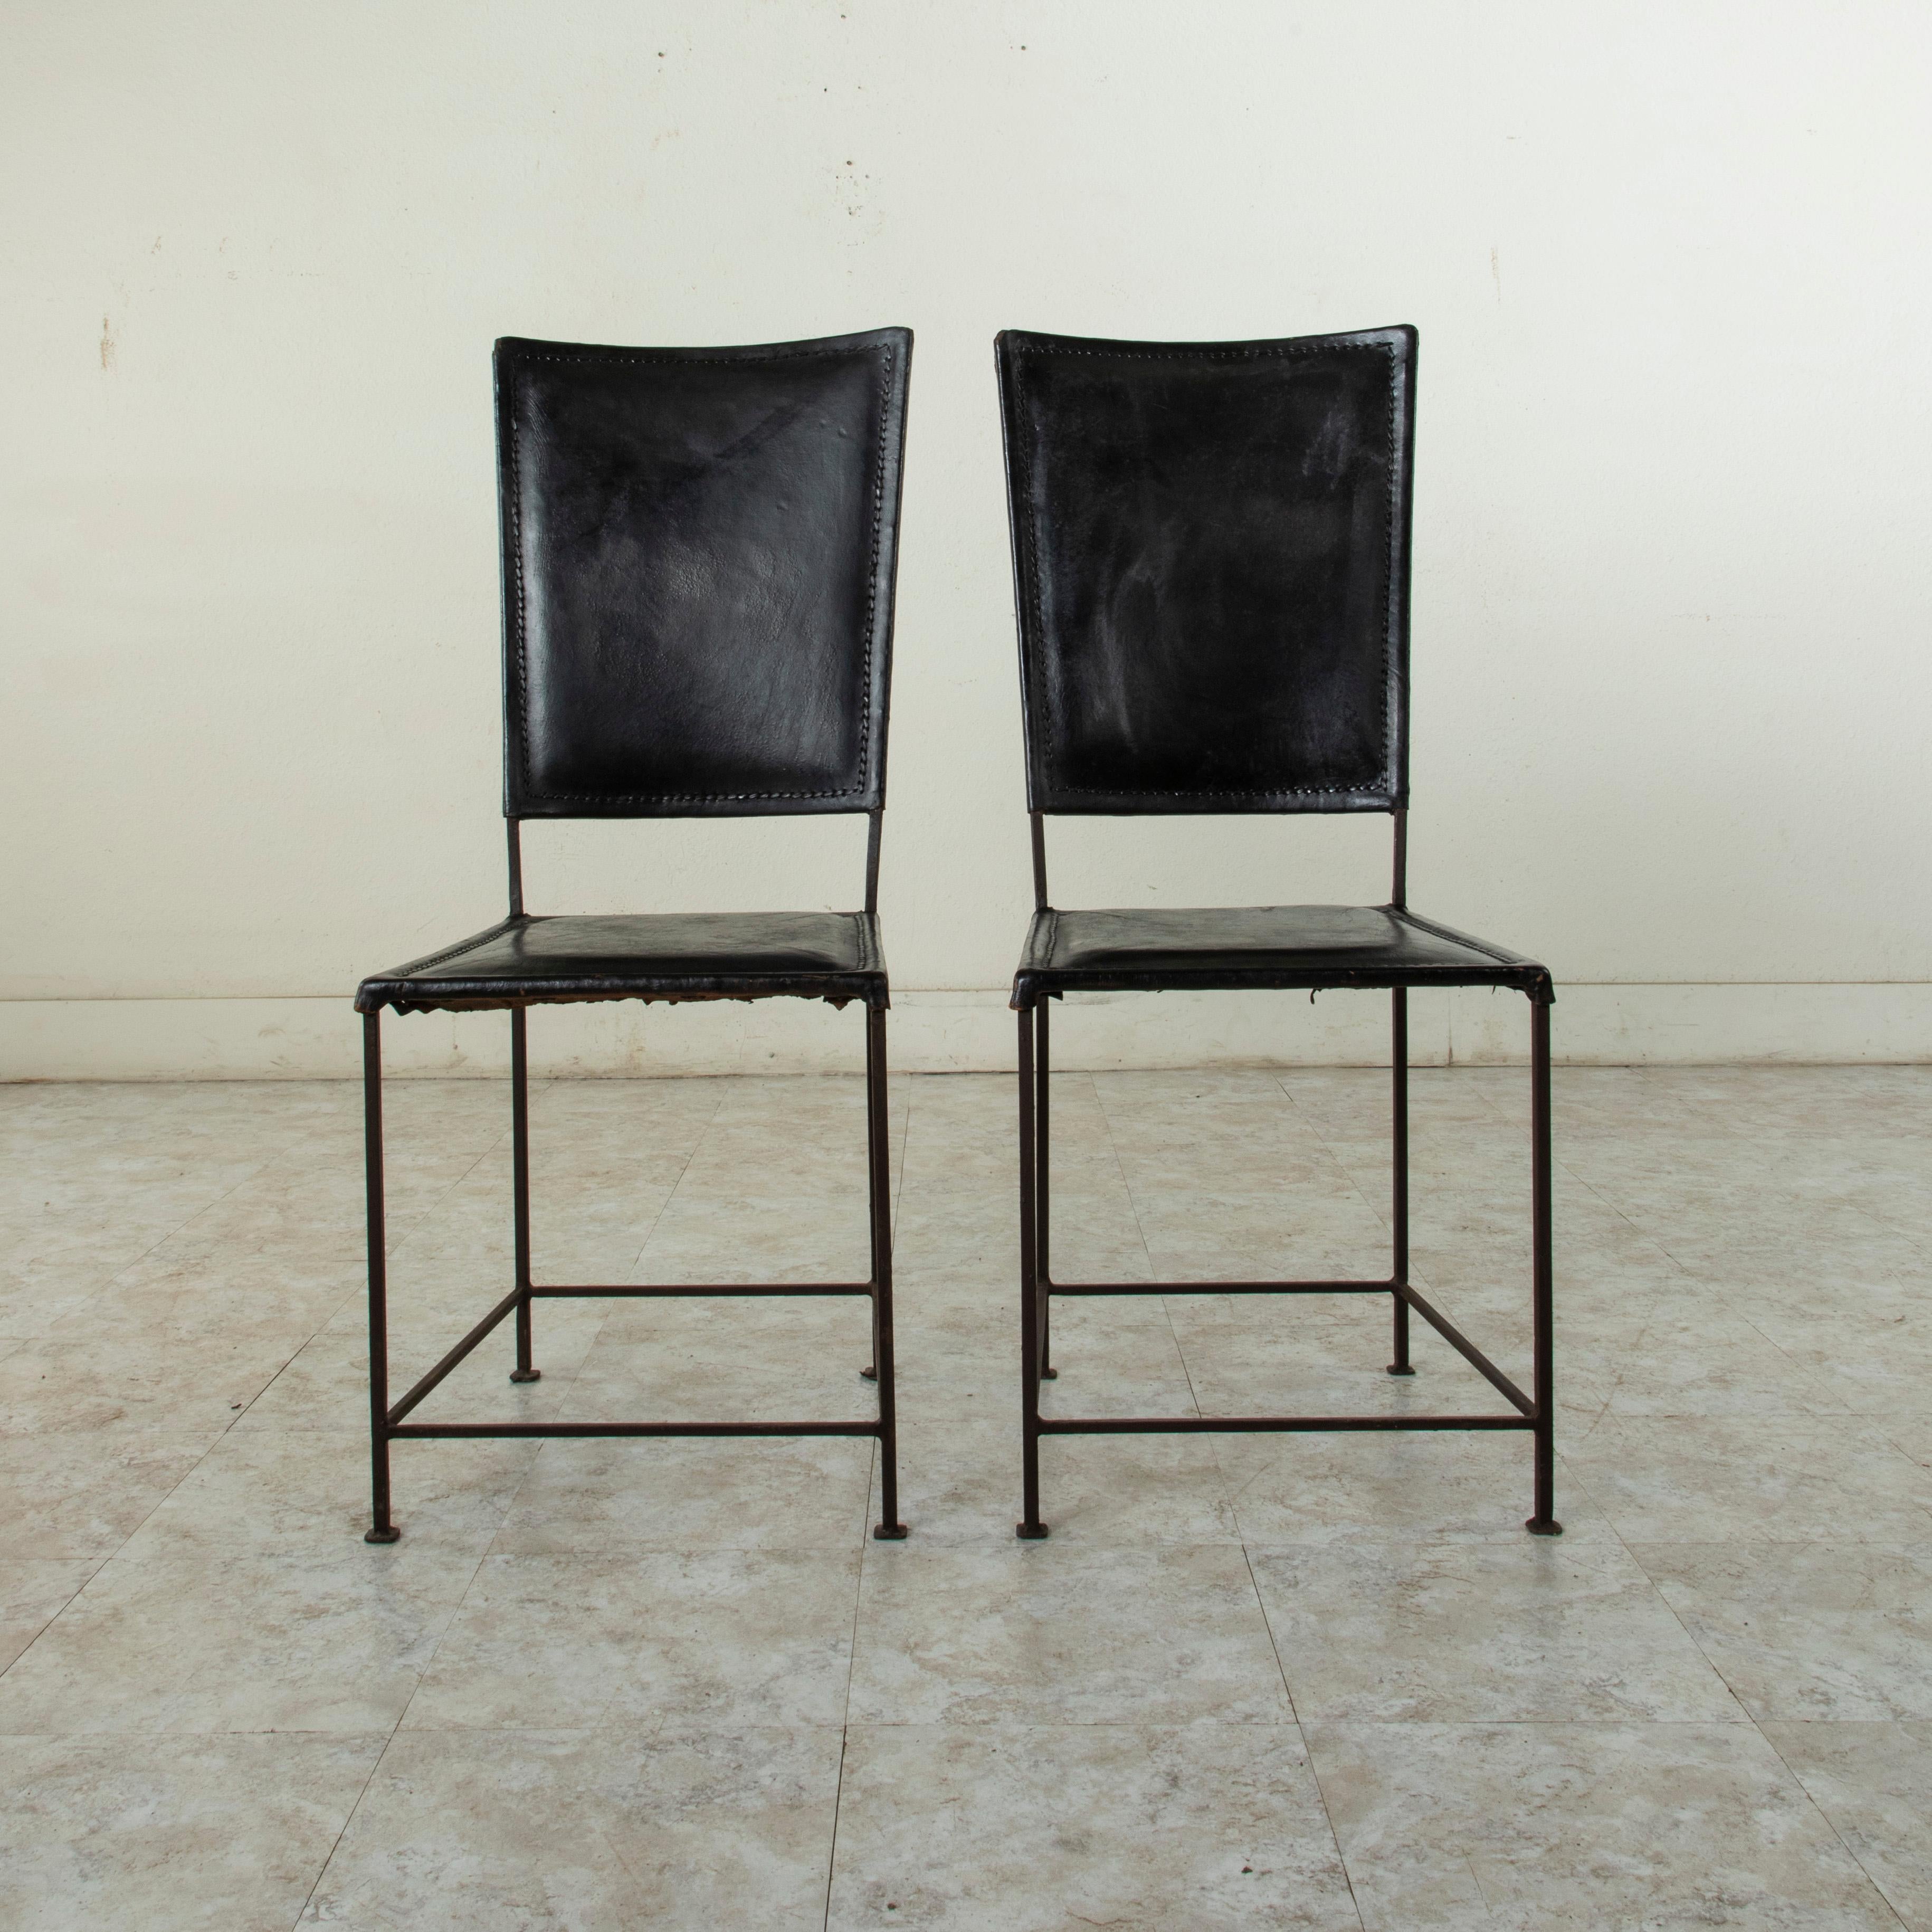 This handsome pair of French iron chairs from the mid-twentieth century features black leather seats and backs. The tall tapered seat backs have a gentle incline. Iron supports on all four sides join the legs. Simple in form, this pair would blend